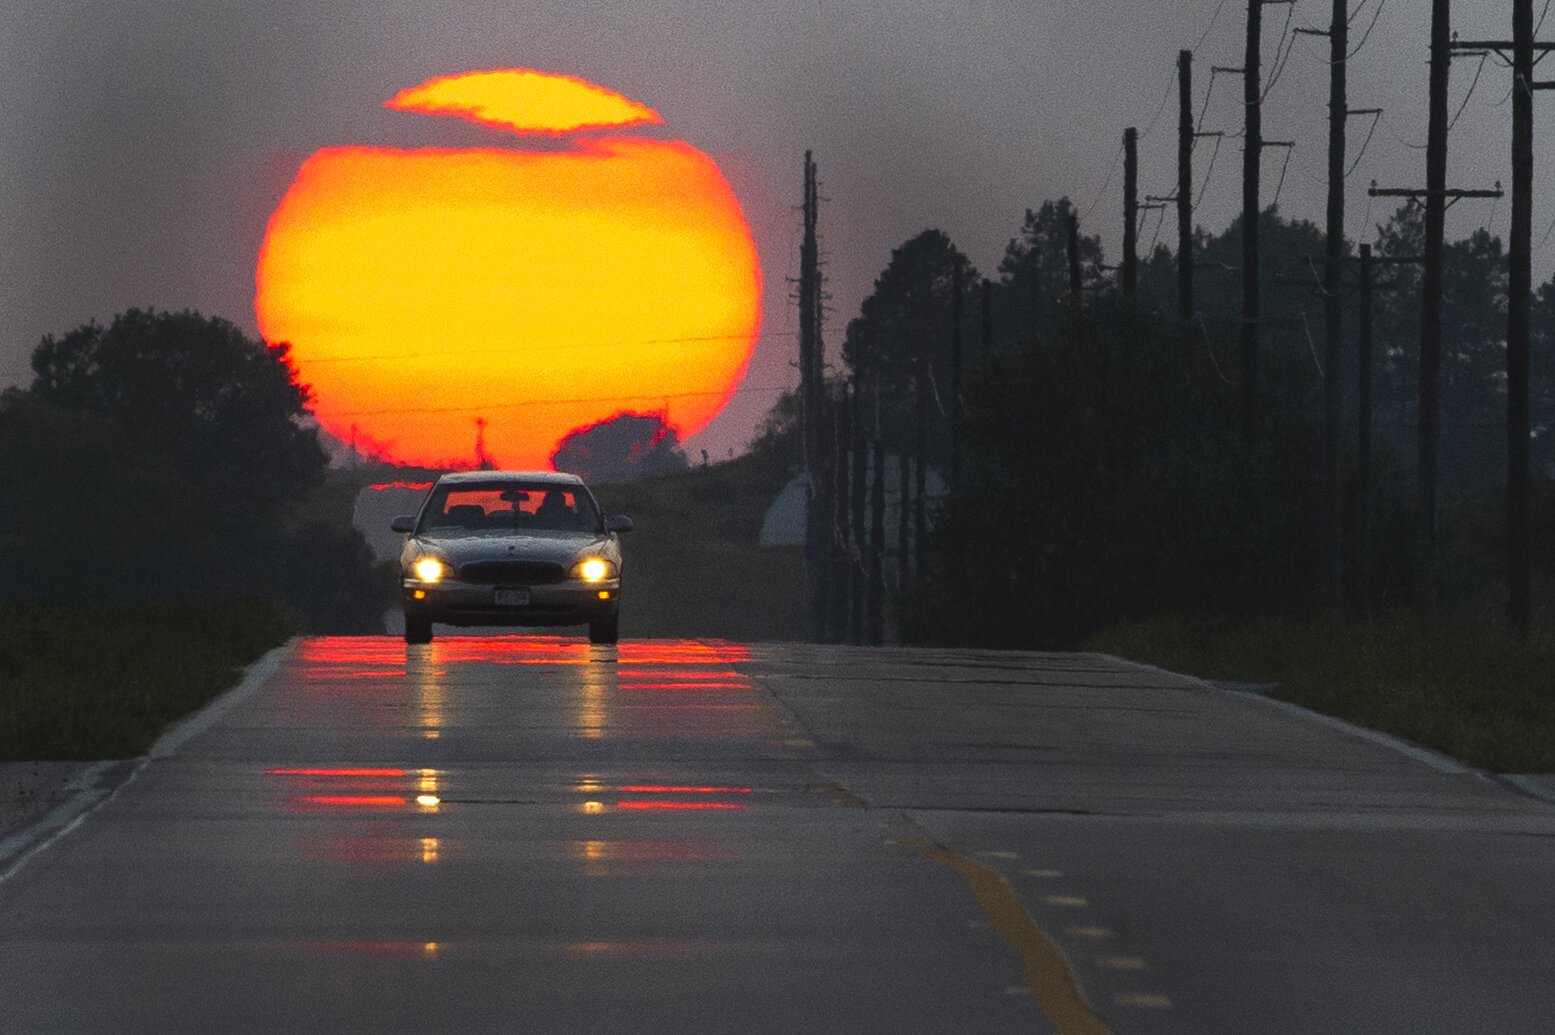  A driver makes their way east as the sun, obscured by smoke from wildfires burning in western Nebraska, sets behind them Monday, September 21, 2020, in Denton, Nebraska.  